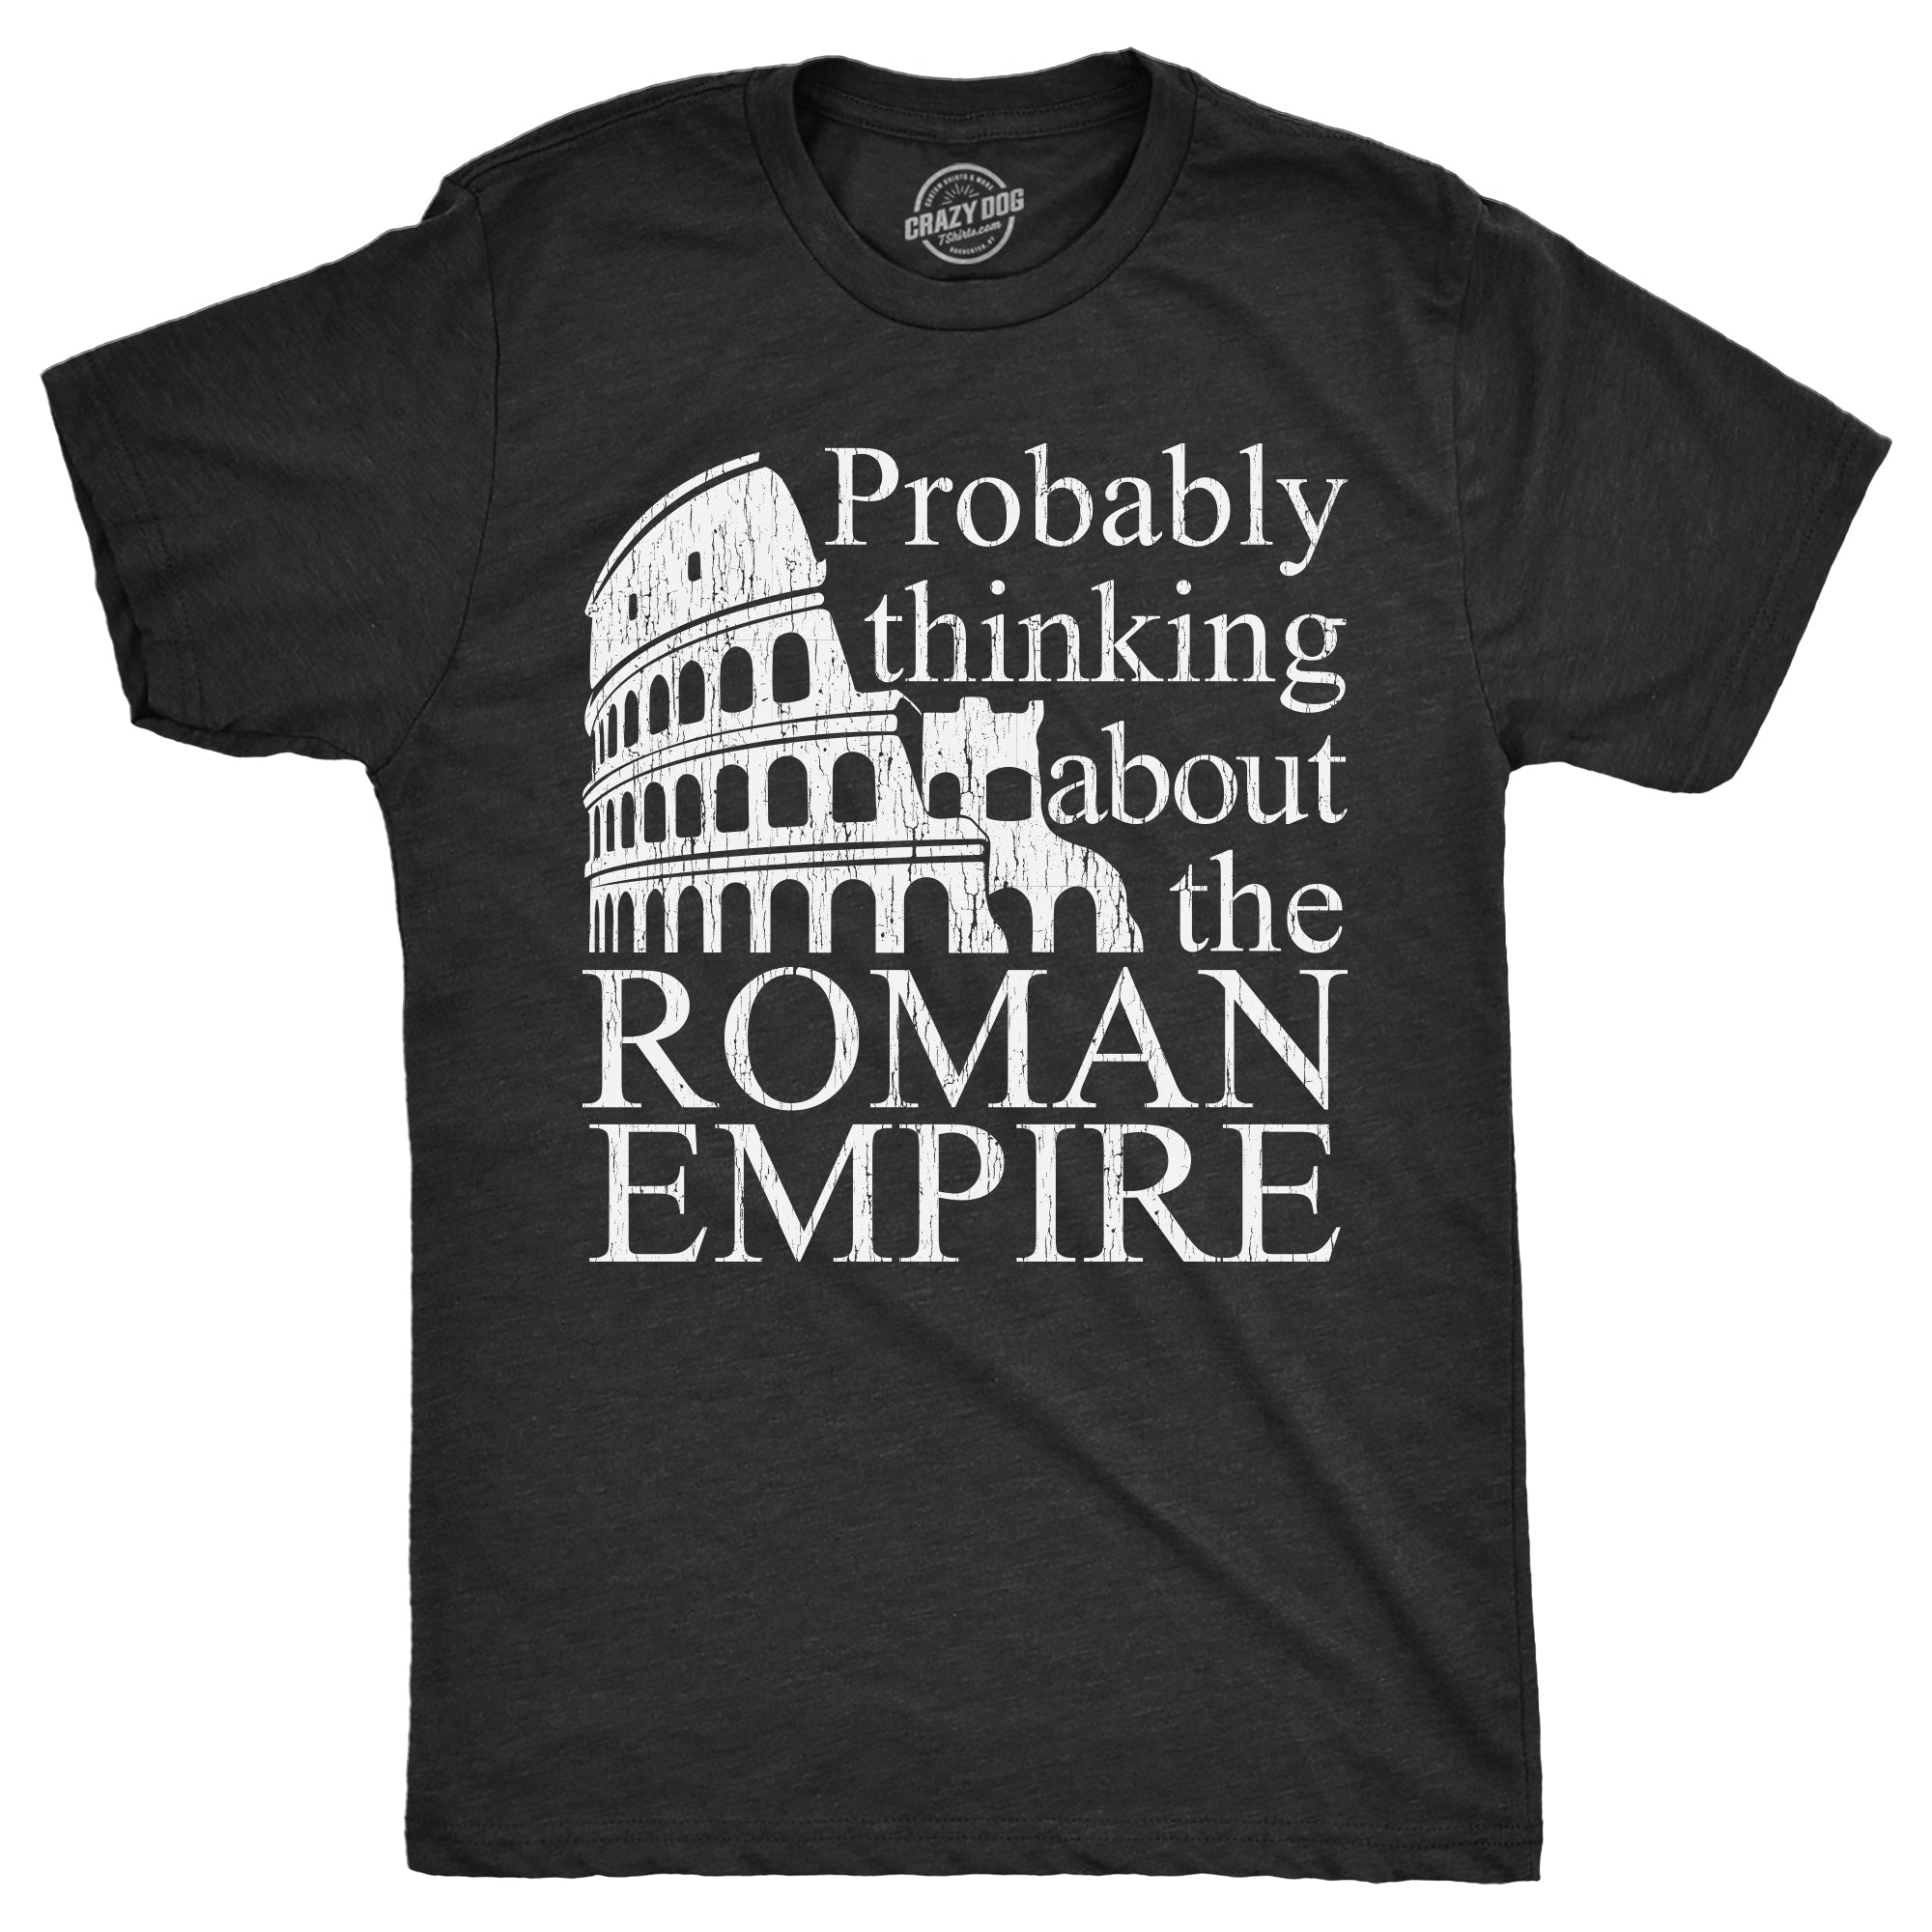 Funny Heather Black - Roman Empire Probably Thinking About The Roman Empire Mens T Shirt Nerdy sarcastic Tee